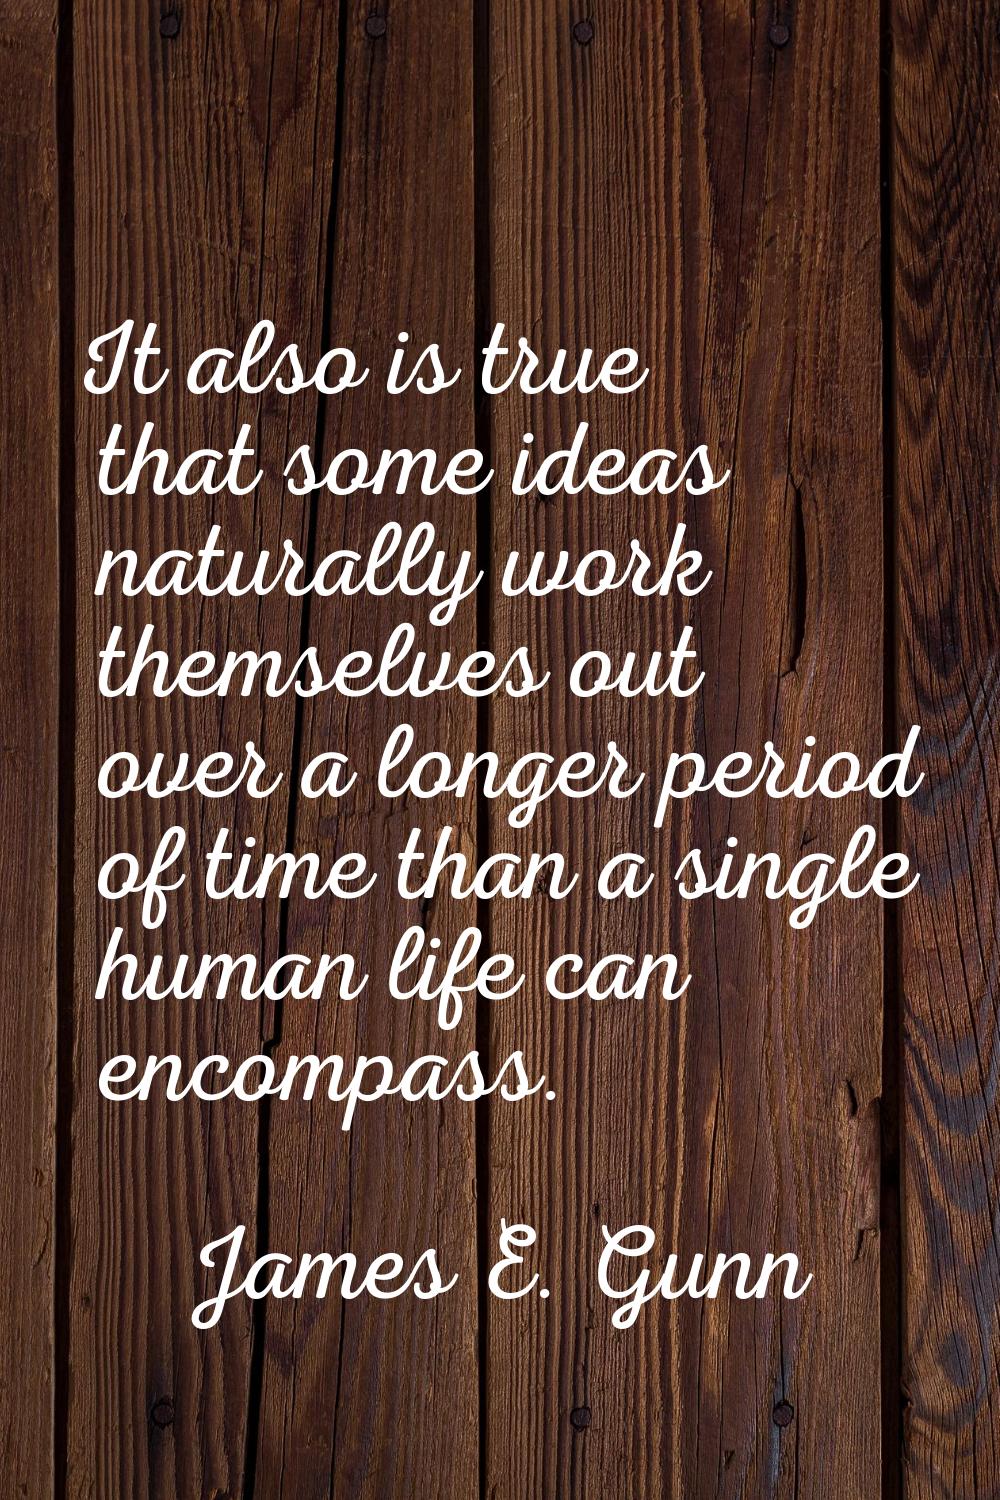 It also is true that some ideas naturally work themselves out over a longer period of time than a s